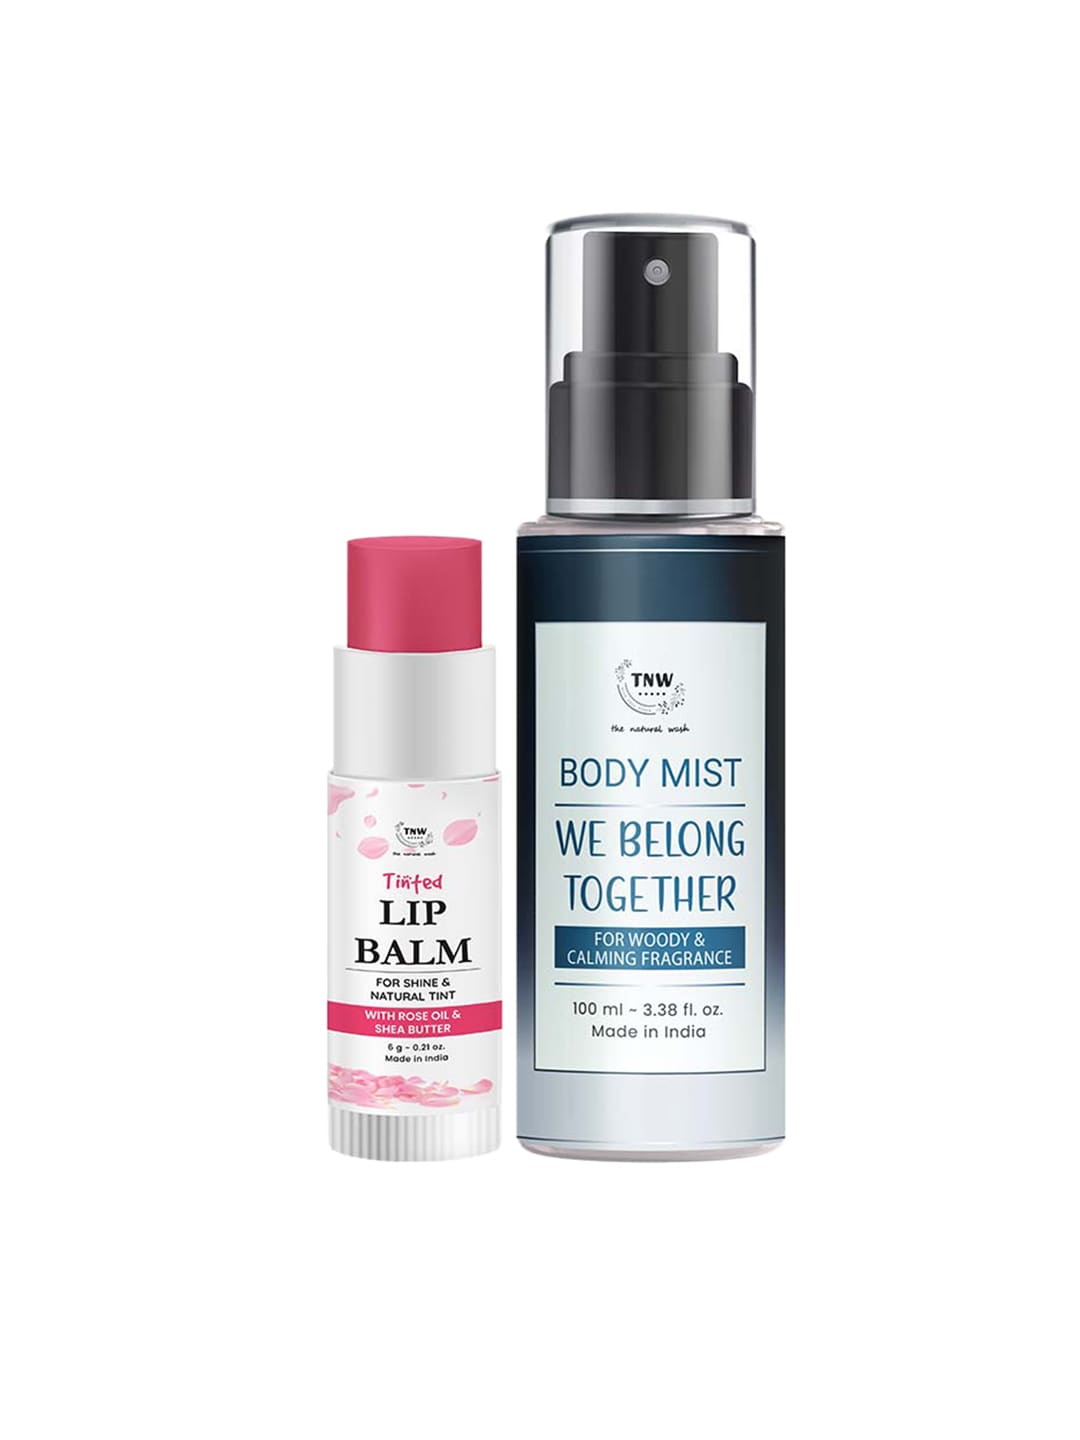 TNW the natural wash We Belong Together Body Mist - Tinted Lip Balm Price in India